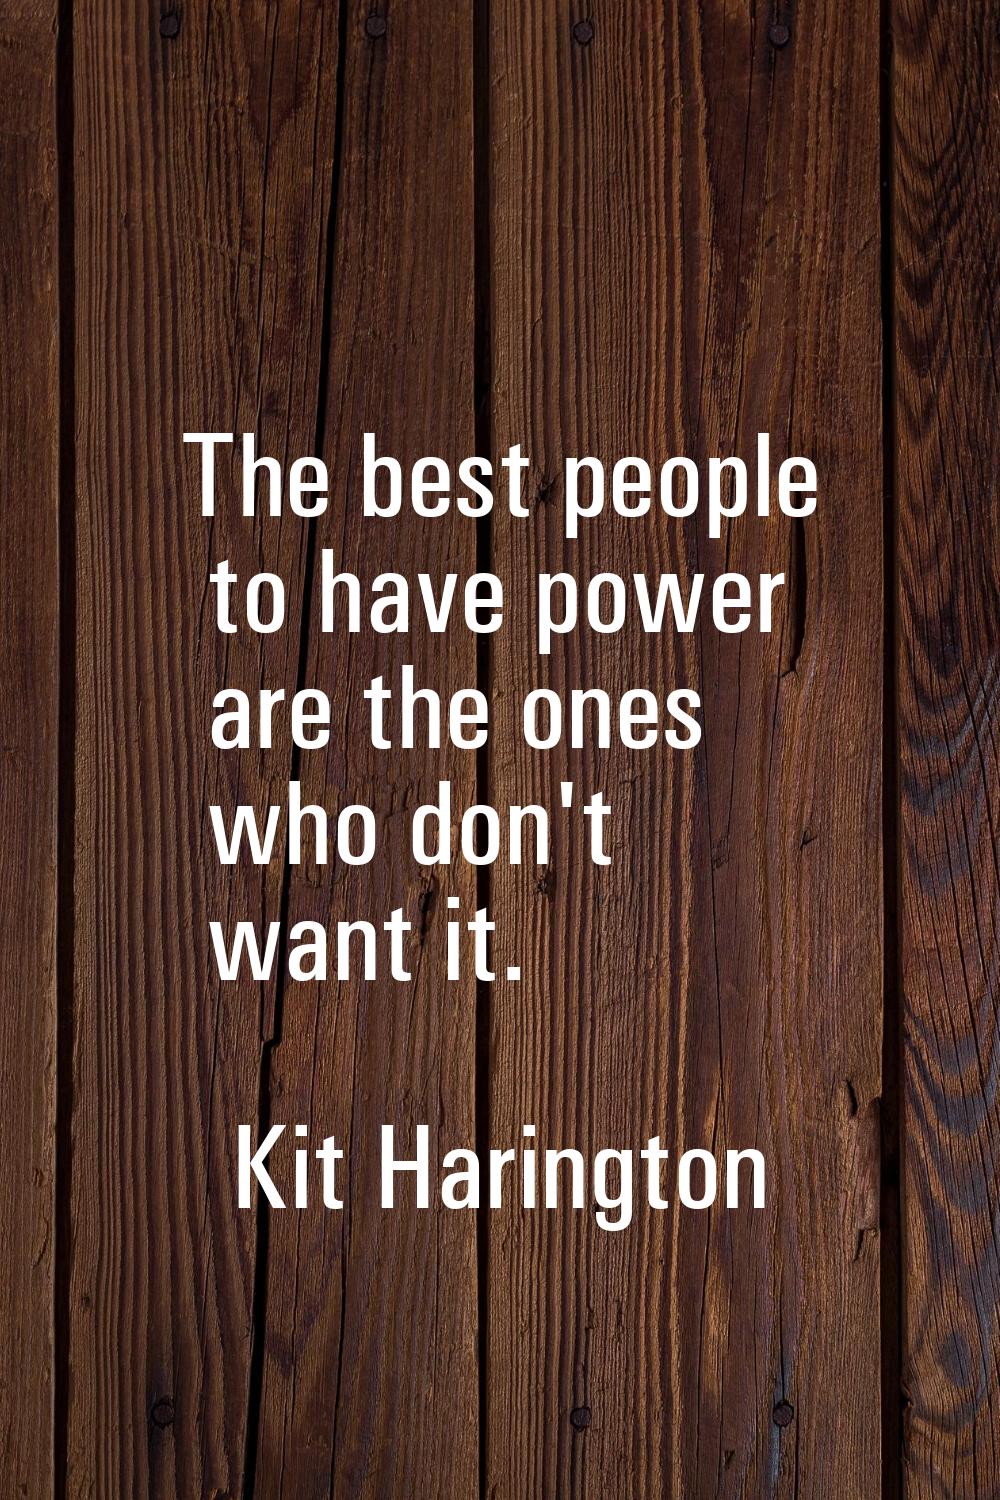 The best people to have power are the ones who don't want it.